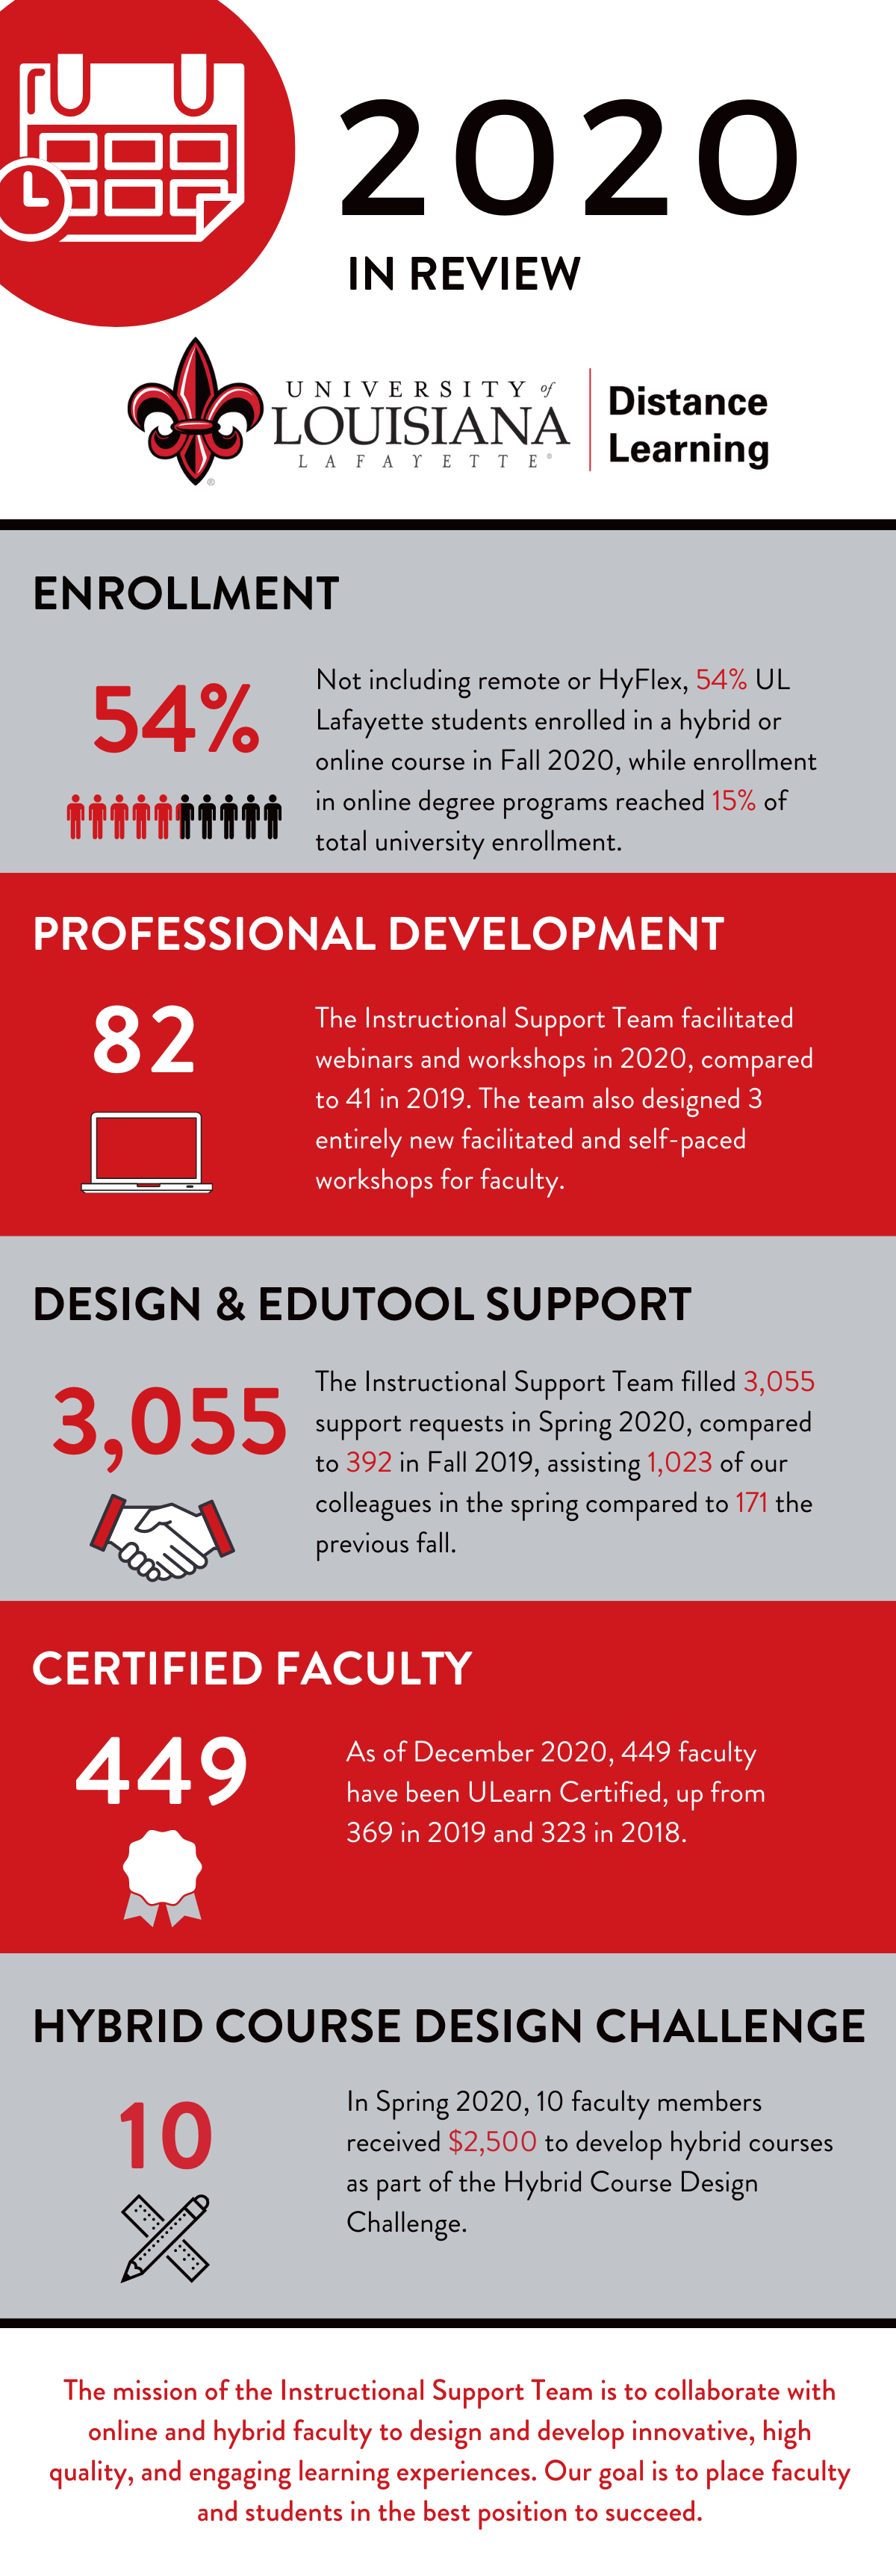 Enrollment 15%: Total enrollment in online degree programs reached 2,460 students this Fall — 15% of total University enrollment.   54%: Not including Remote or HyFlex enrollment, 54% of all UL Lafayette students enrolled in a hybrid or online course in Fall 2020.  Professional Development 82: The Instructional Support Team designed and facilitated 82 webinars and workshops in 2020, compared to 41 in 2019, to provide tools and best practices for faculty and staff.  3: The Instructional Support Team designed three entirely new self-paced and facilitated workshops for faculty — Basic Course Building, Strategies for Engaging Learners Online, and Aligning Course Content to Learning Objectives.  Design & EduTool Support  1,023: With more faculty and staff using Moodle and EduTools, the Instructional Support Team assisted 1,023 of our colleagues in Spring 2020, as compared to 171 in Fall 2019.  ﻿3,055: With more users come more requests! The Instructional Support Team filled 3,055 support requests in Spring 2020, compared to 392 during the previous semester.  Certified Faculty 449: The number of faculty certified to teach online and hybrid courses continues to grow. Today we stand at 449 ULearn Certified Faculty, up 22% from 369 in 2019 and 323 in 2018.  Hybrid Course Design Challenge ﻿10: 10 faculty members received a $2,500 to develop hybrid courses as part of the Spring 2020 Hybrid Course Design Challenge, learning more about course design and creating new opportunities for students.